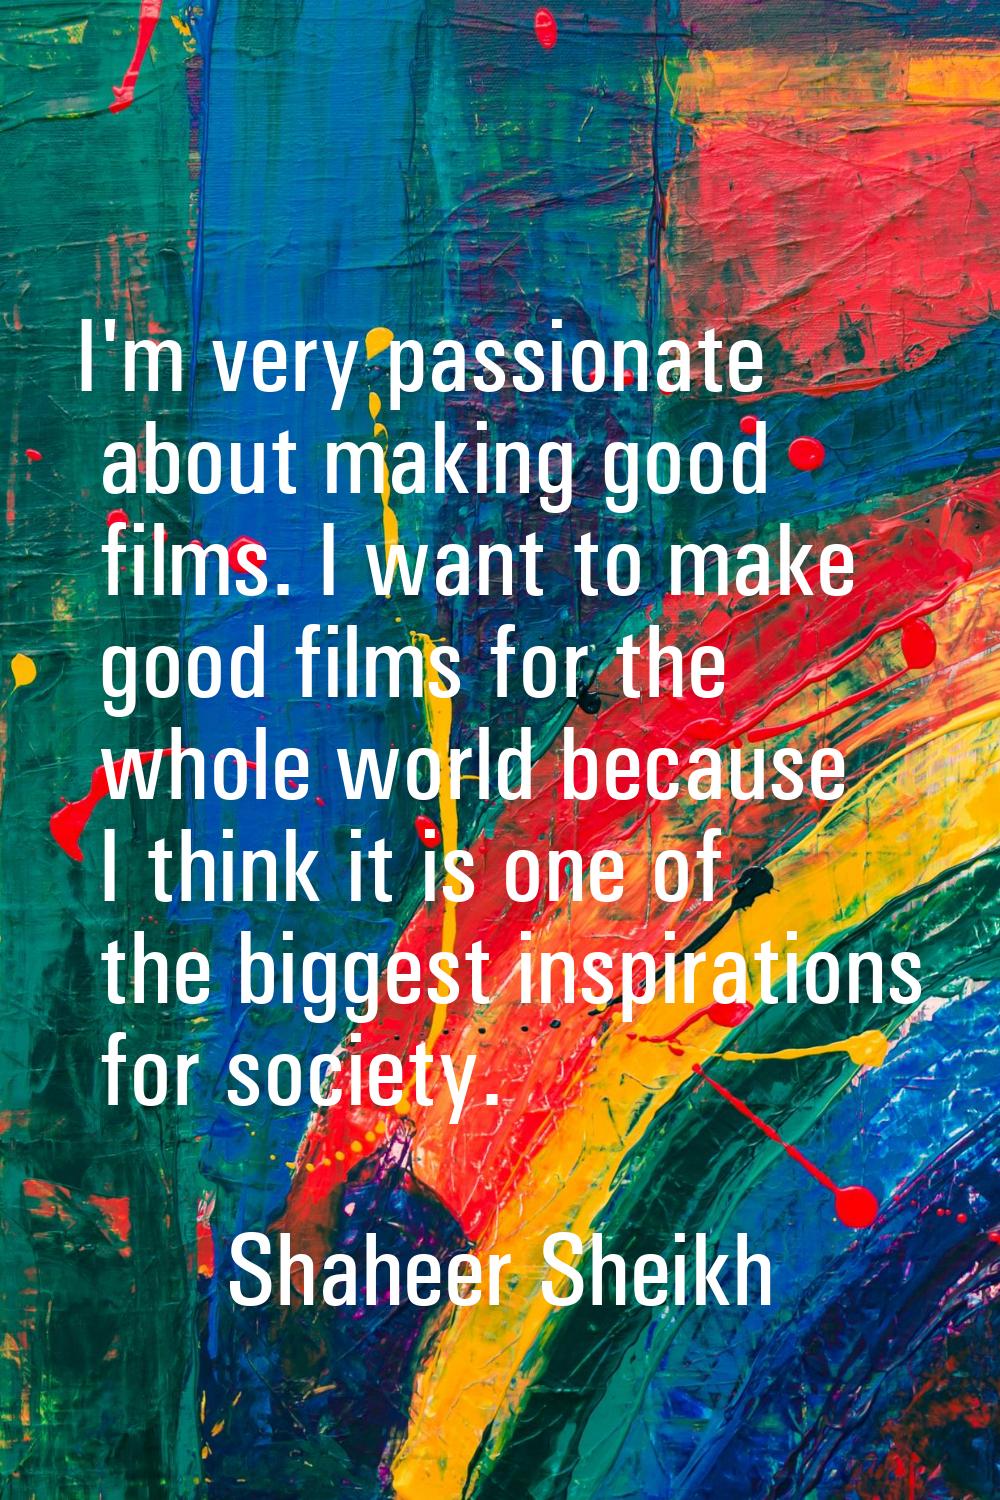 I'm very passionate about making good films. I want to make good films for the whole world because 